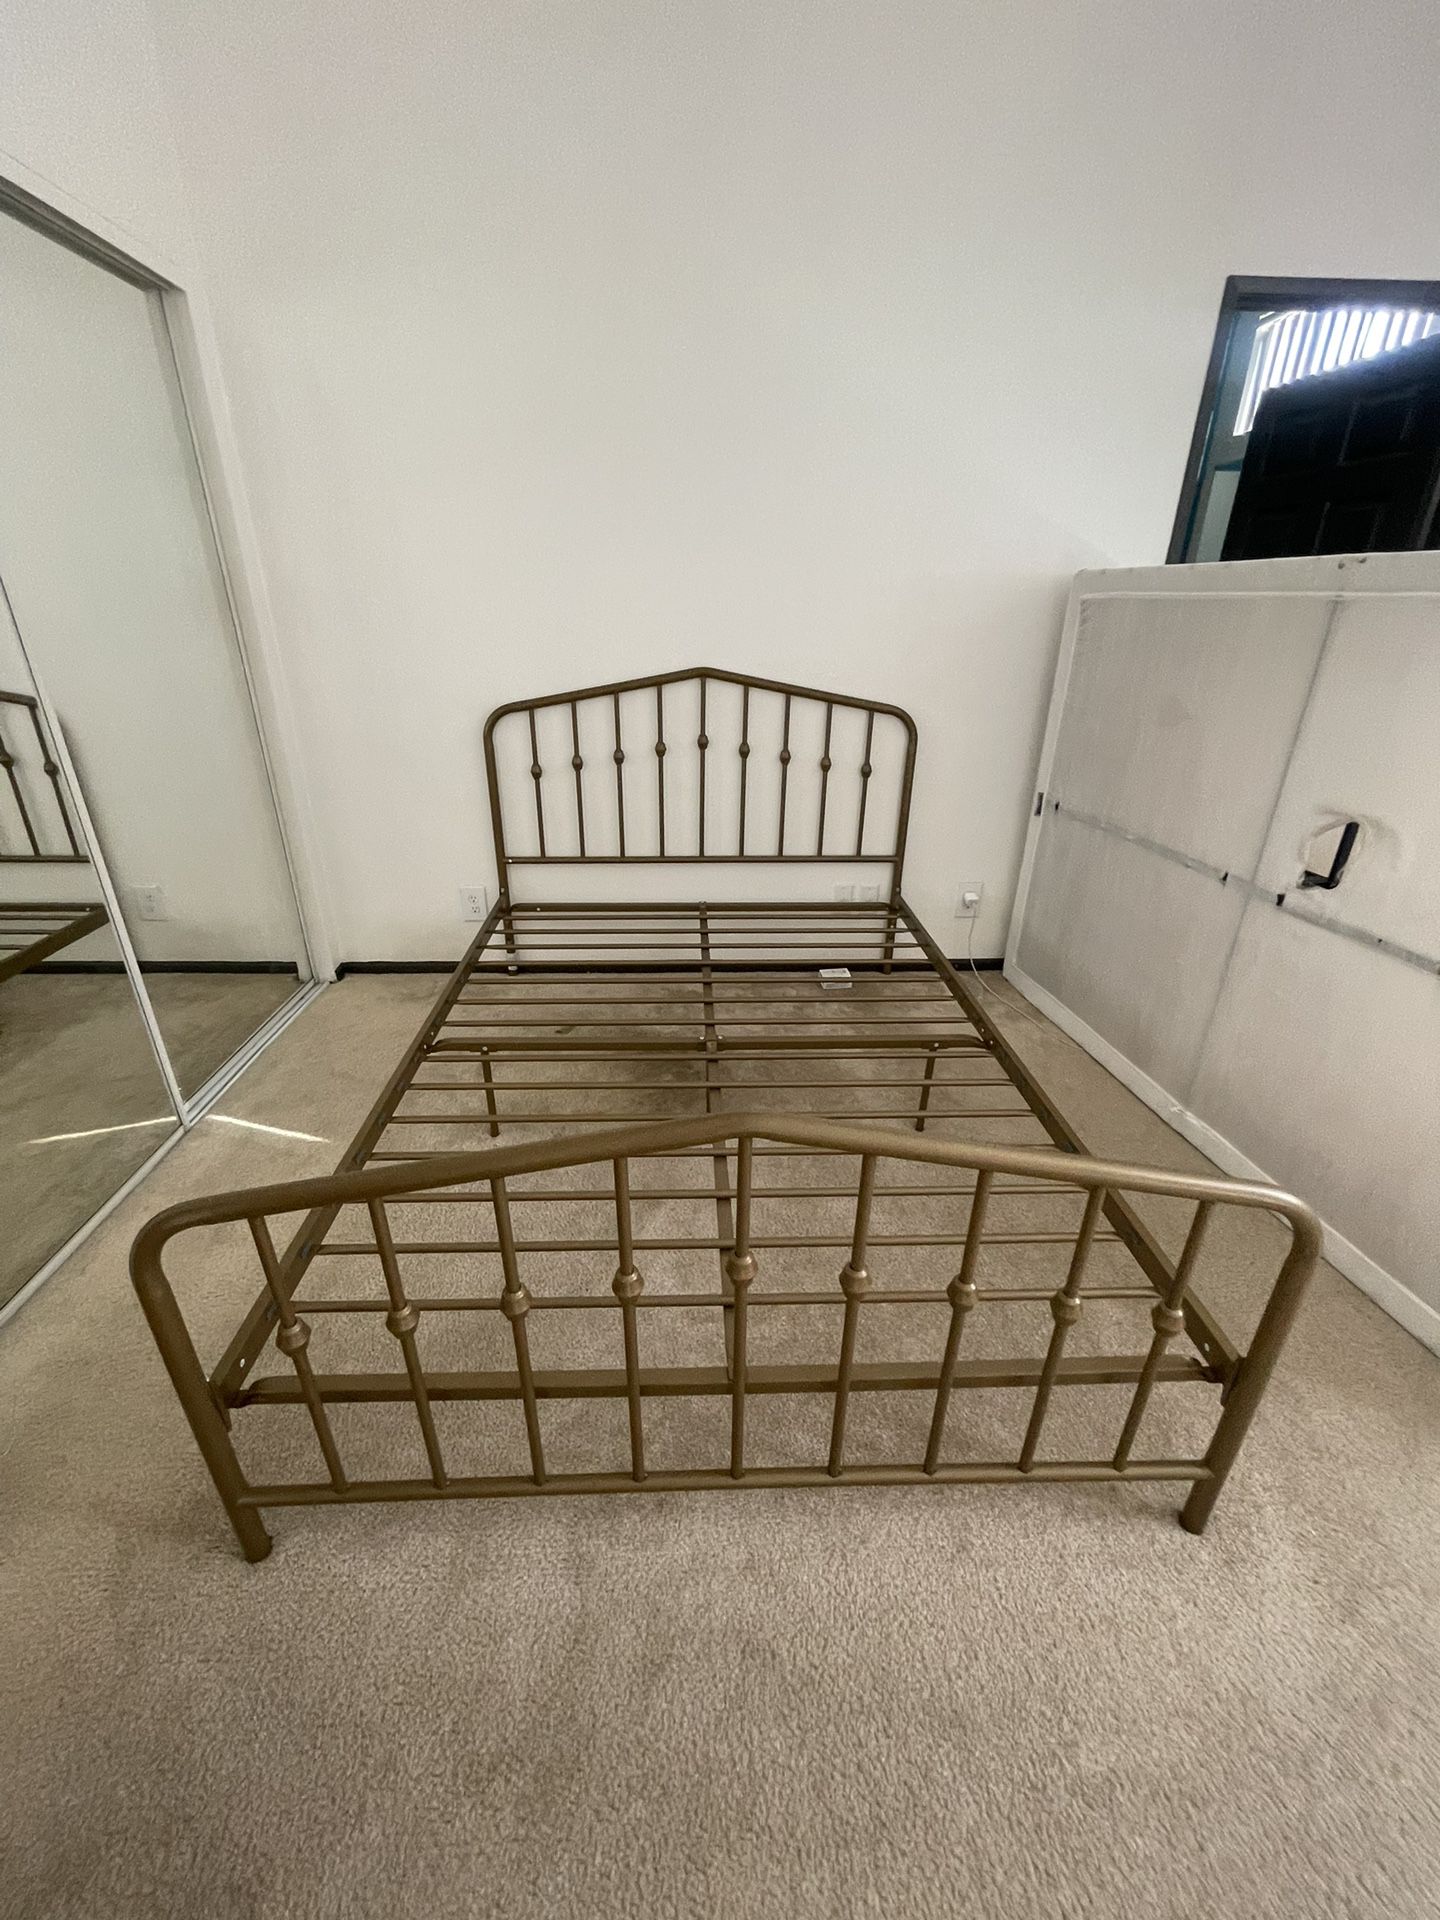 Full size Bedframe (Box spring Included)